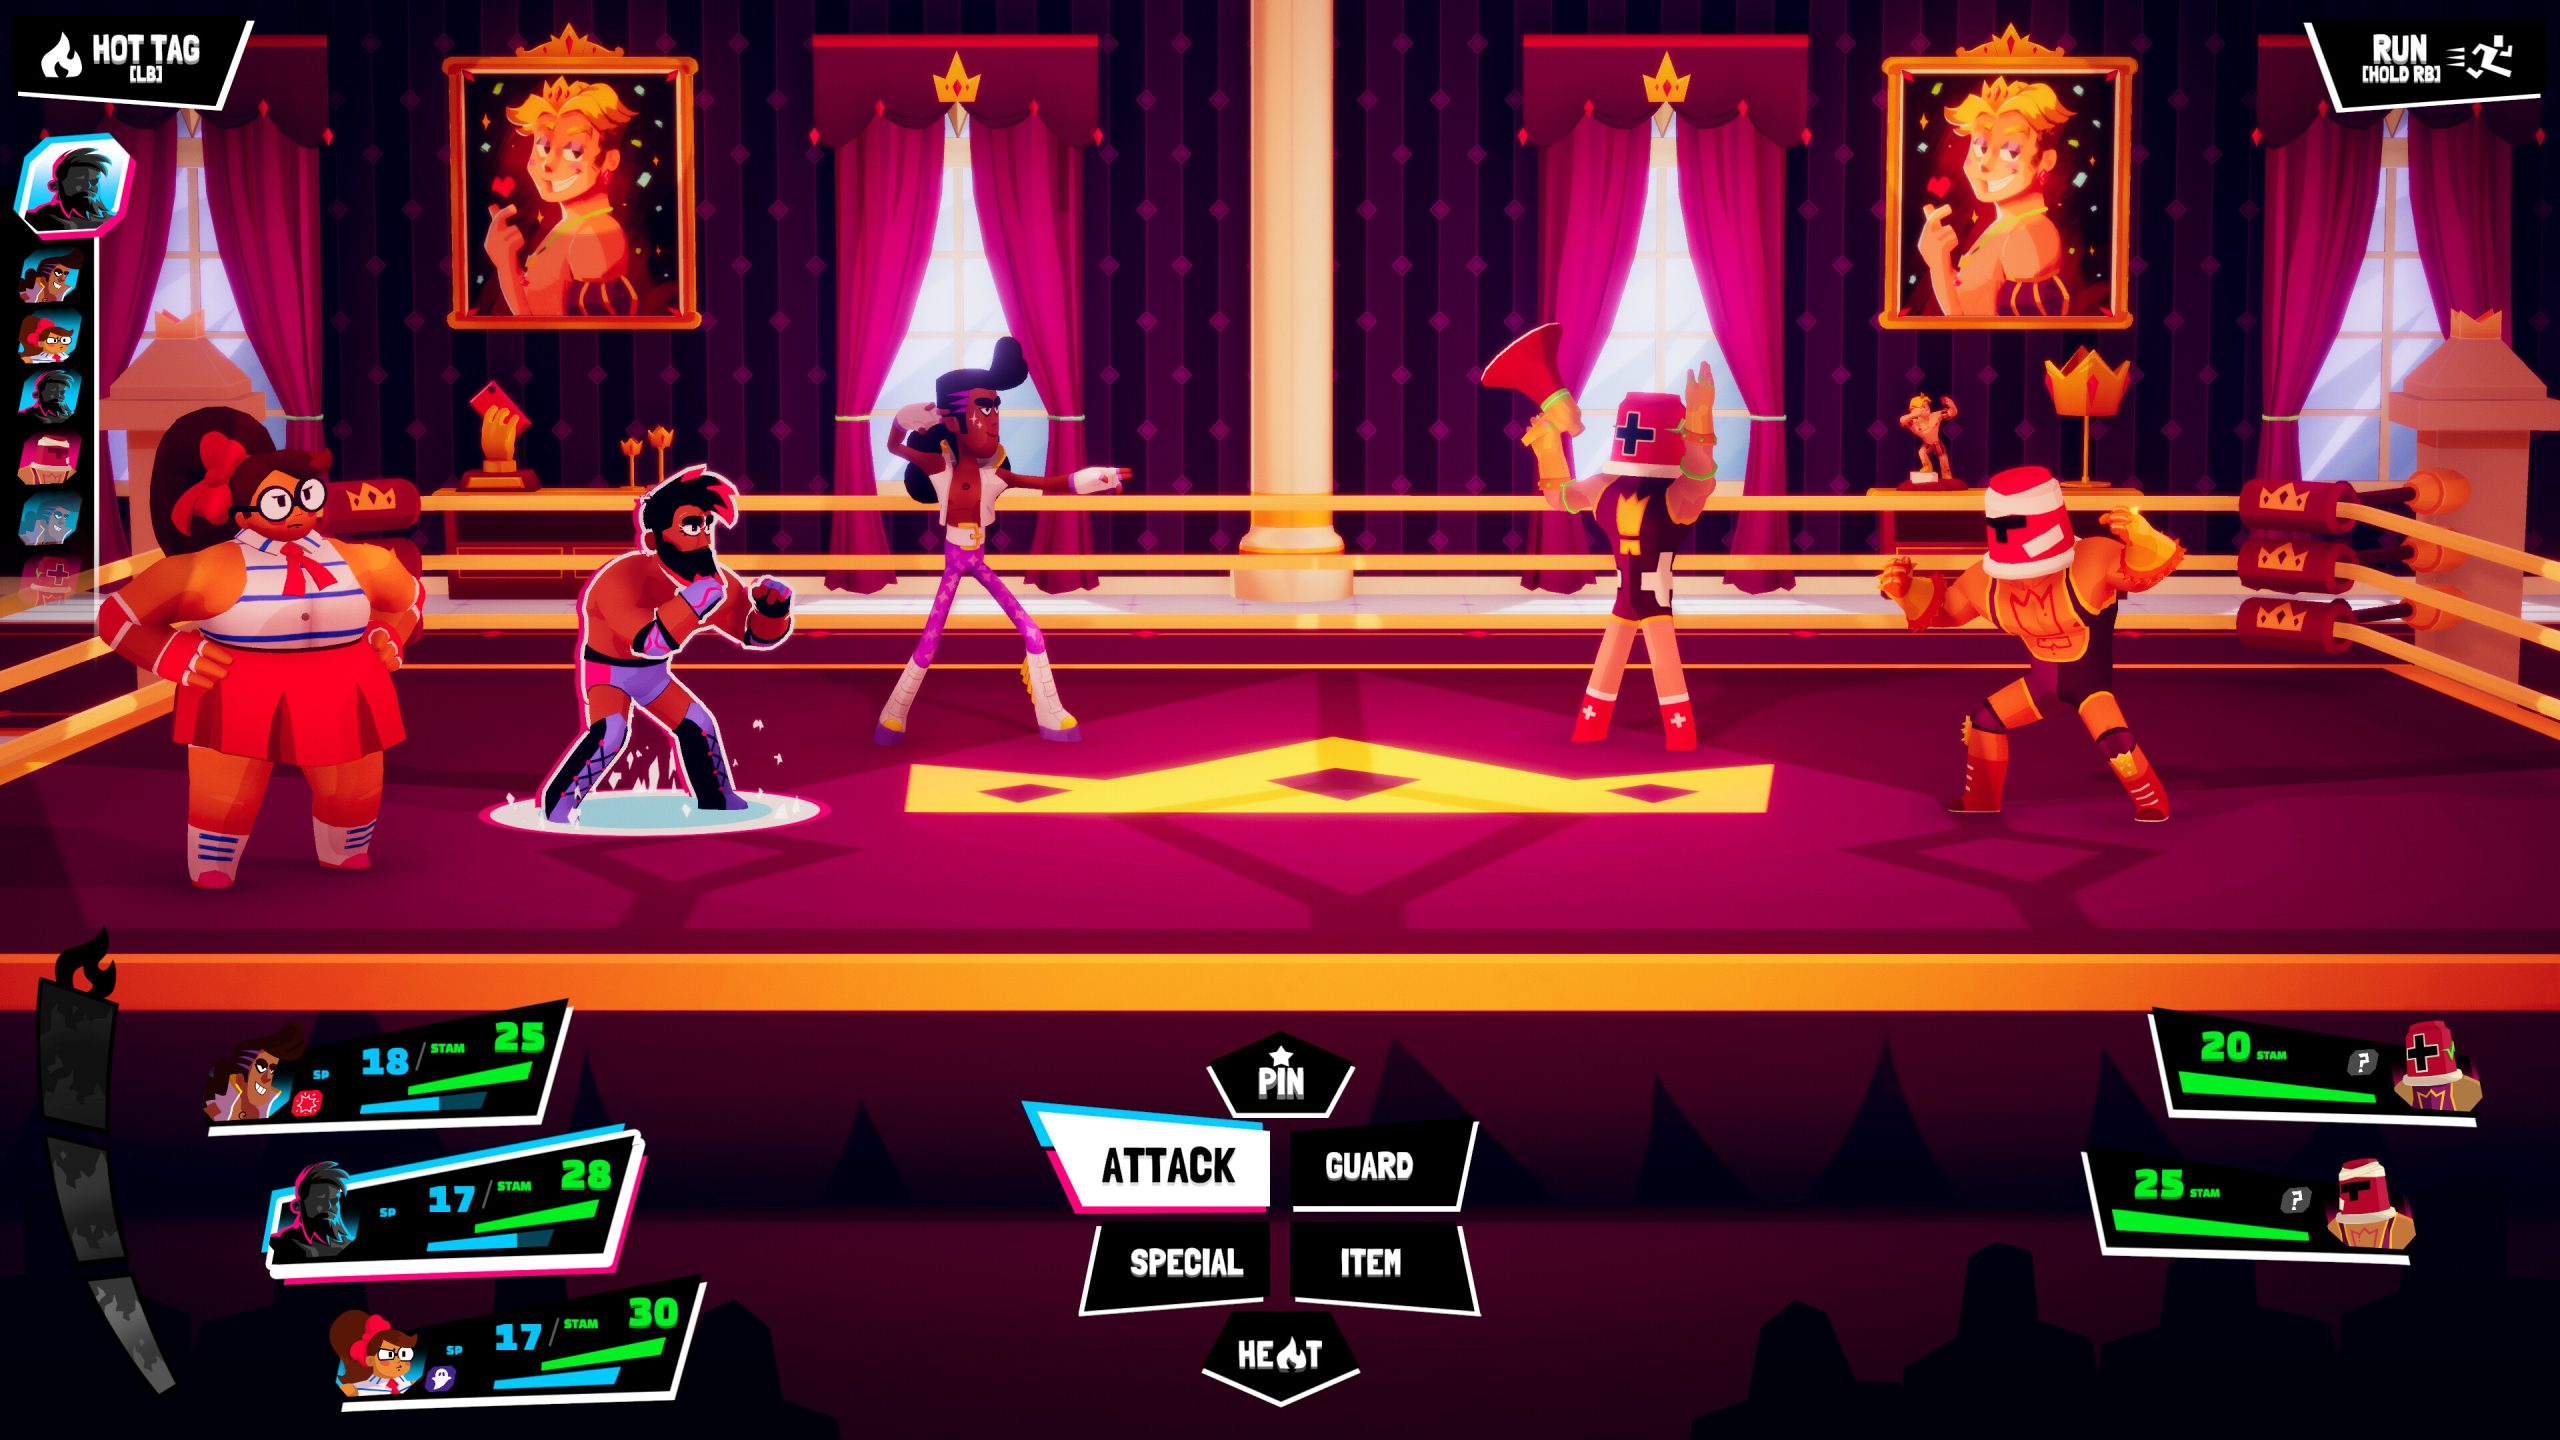 A screenshot from Wrestle Story. Two the left is one woman and two men, ready to fight. To the right are two enemies wearing helmets. The options are pin, attack (highlighted), guard, special, item, and heat.